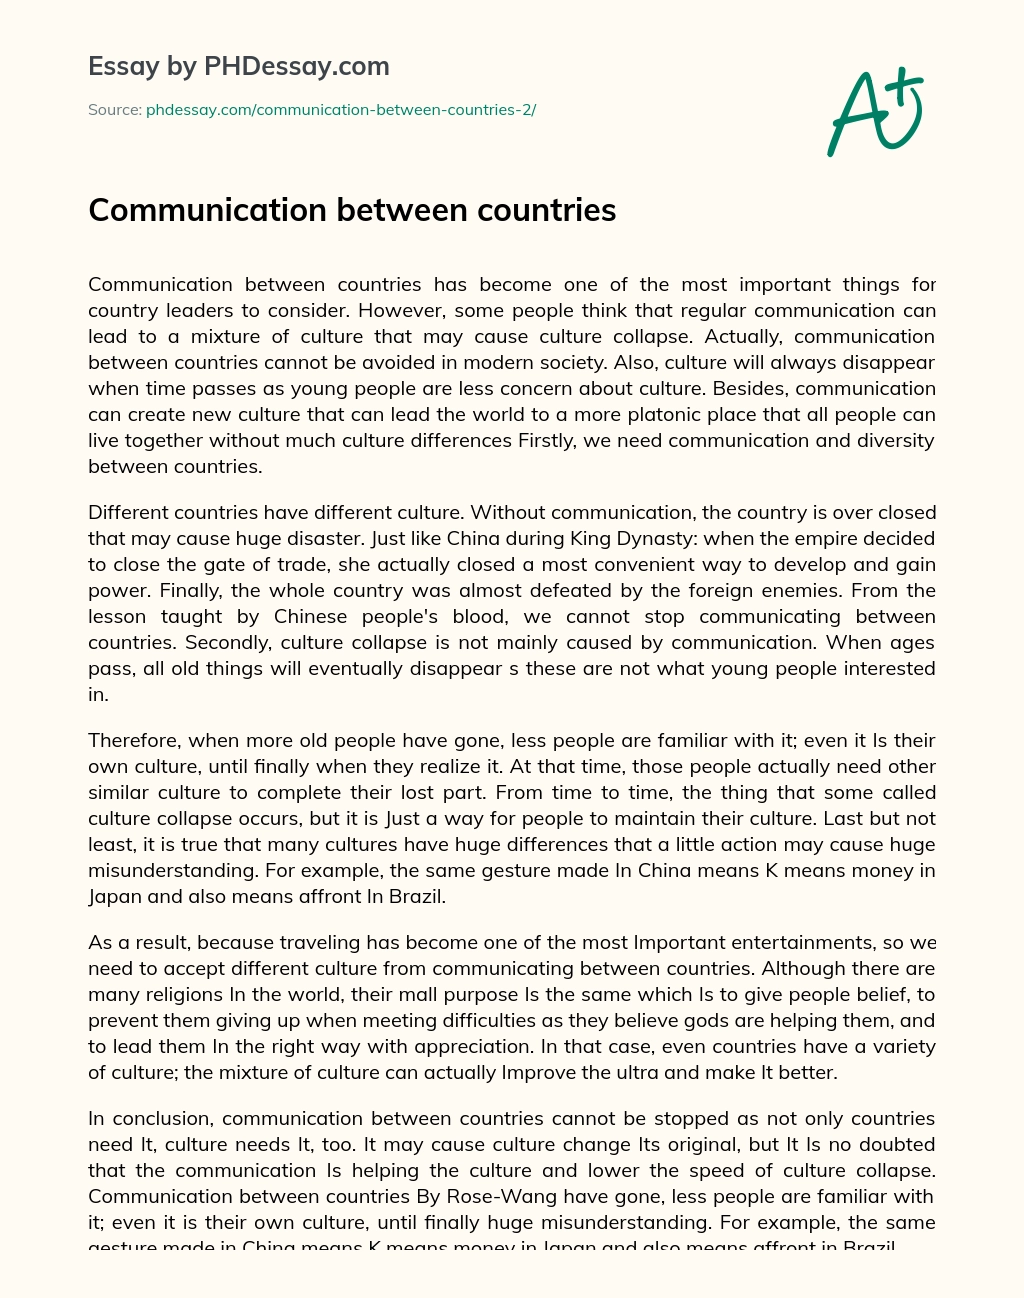 Communication between countries essay